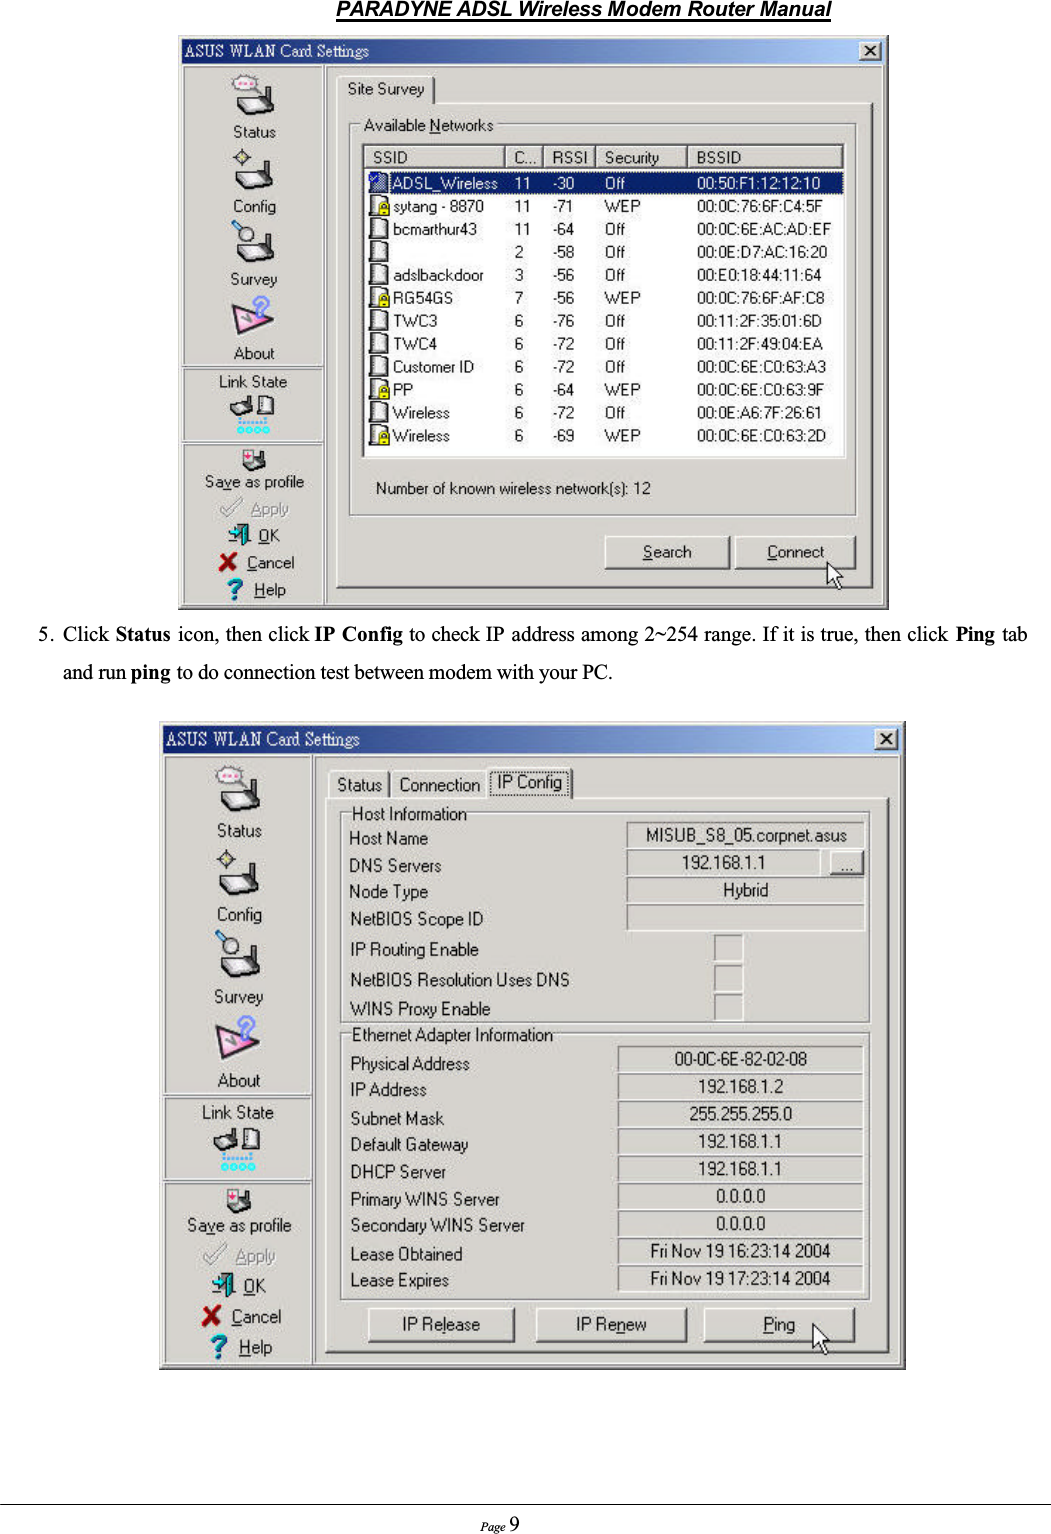 PARADYNE ADSL Wireless Modem Router ManualPage 95. Click Status icon, then click IP Config to check IP address among 2~254 range. If it is true, then click Ping  tab and run ping to do connection test between modem with your PC.